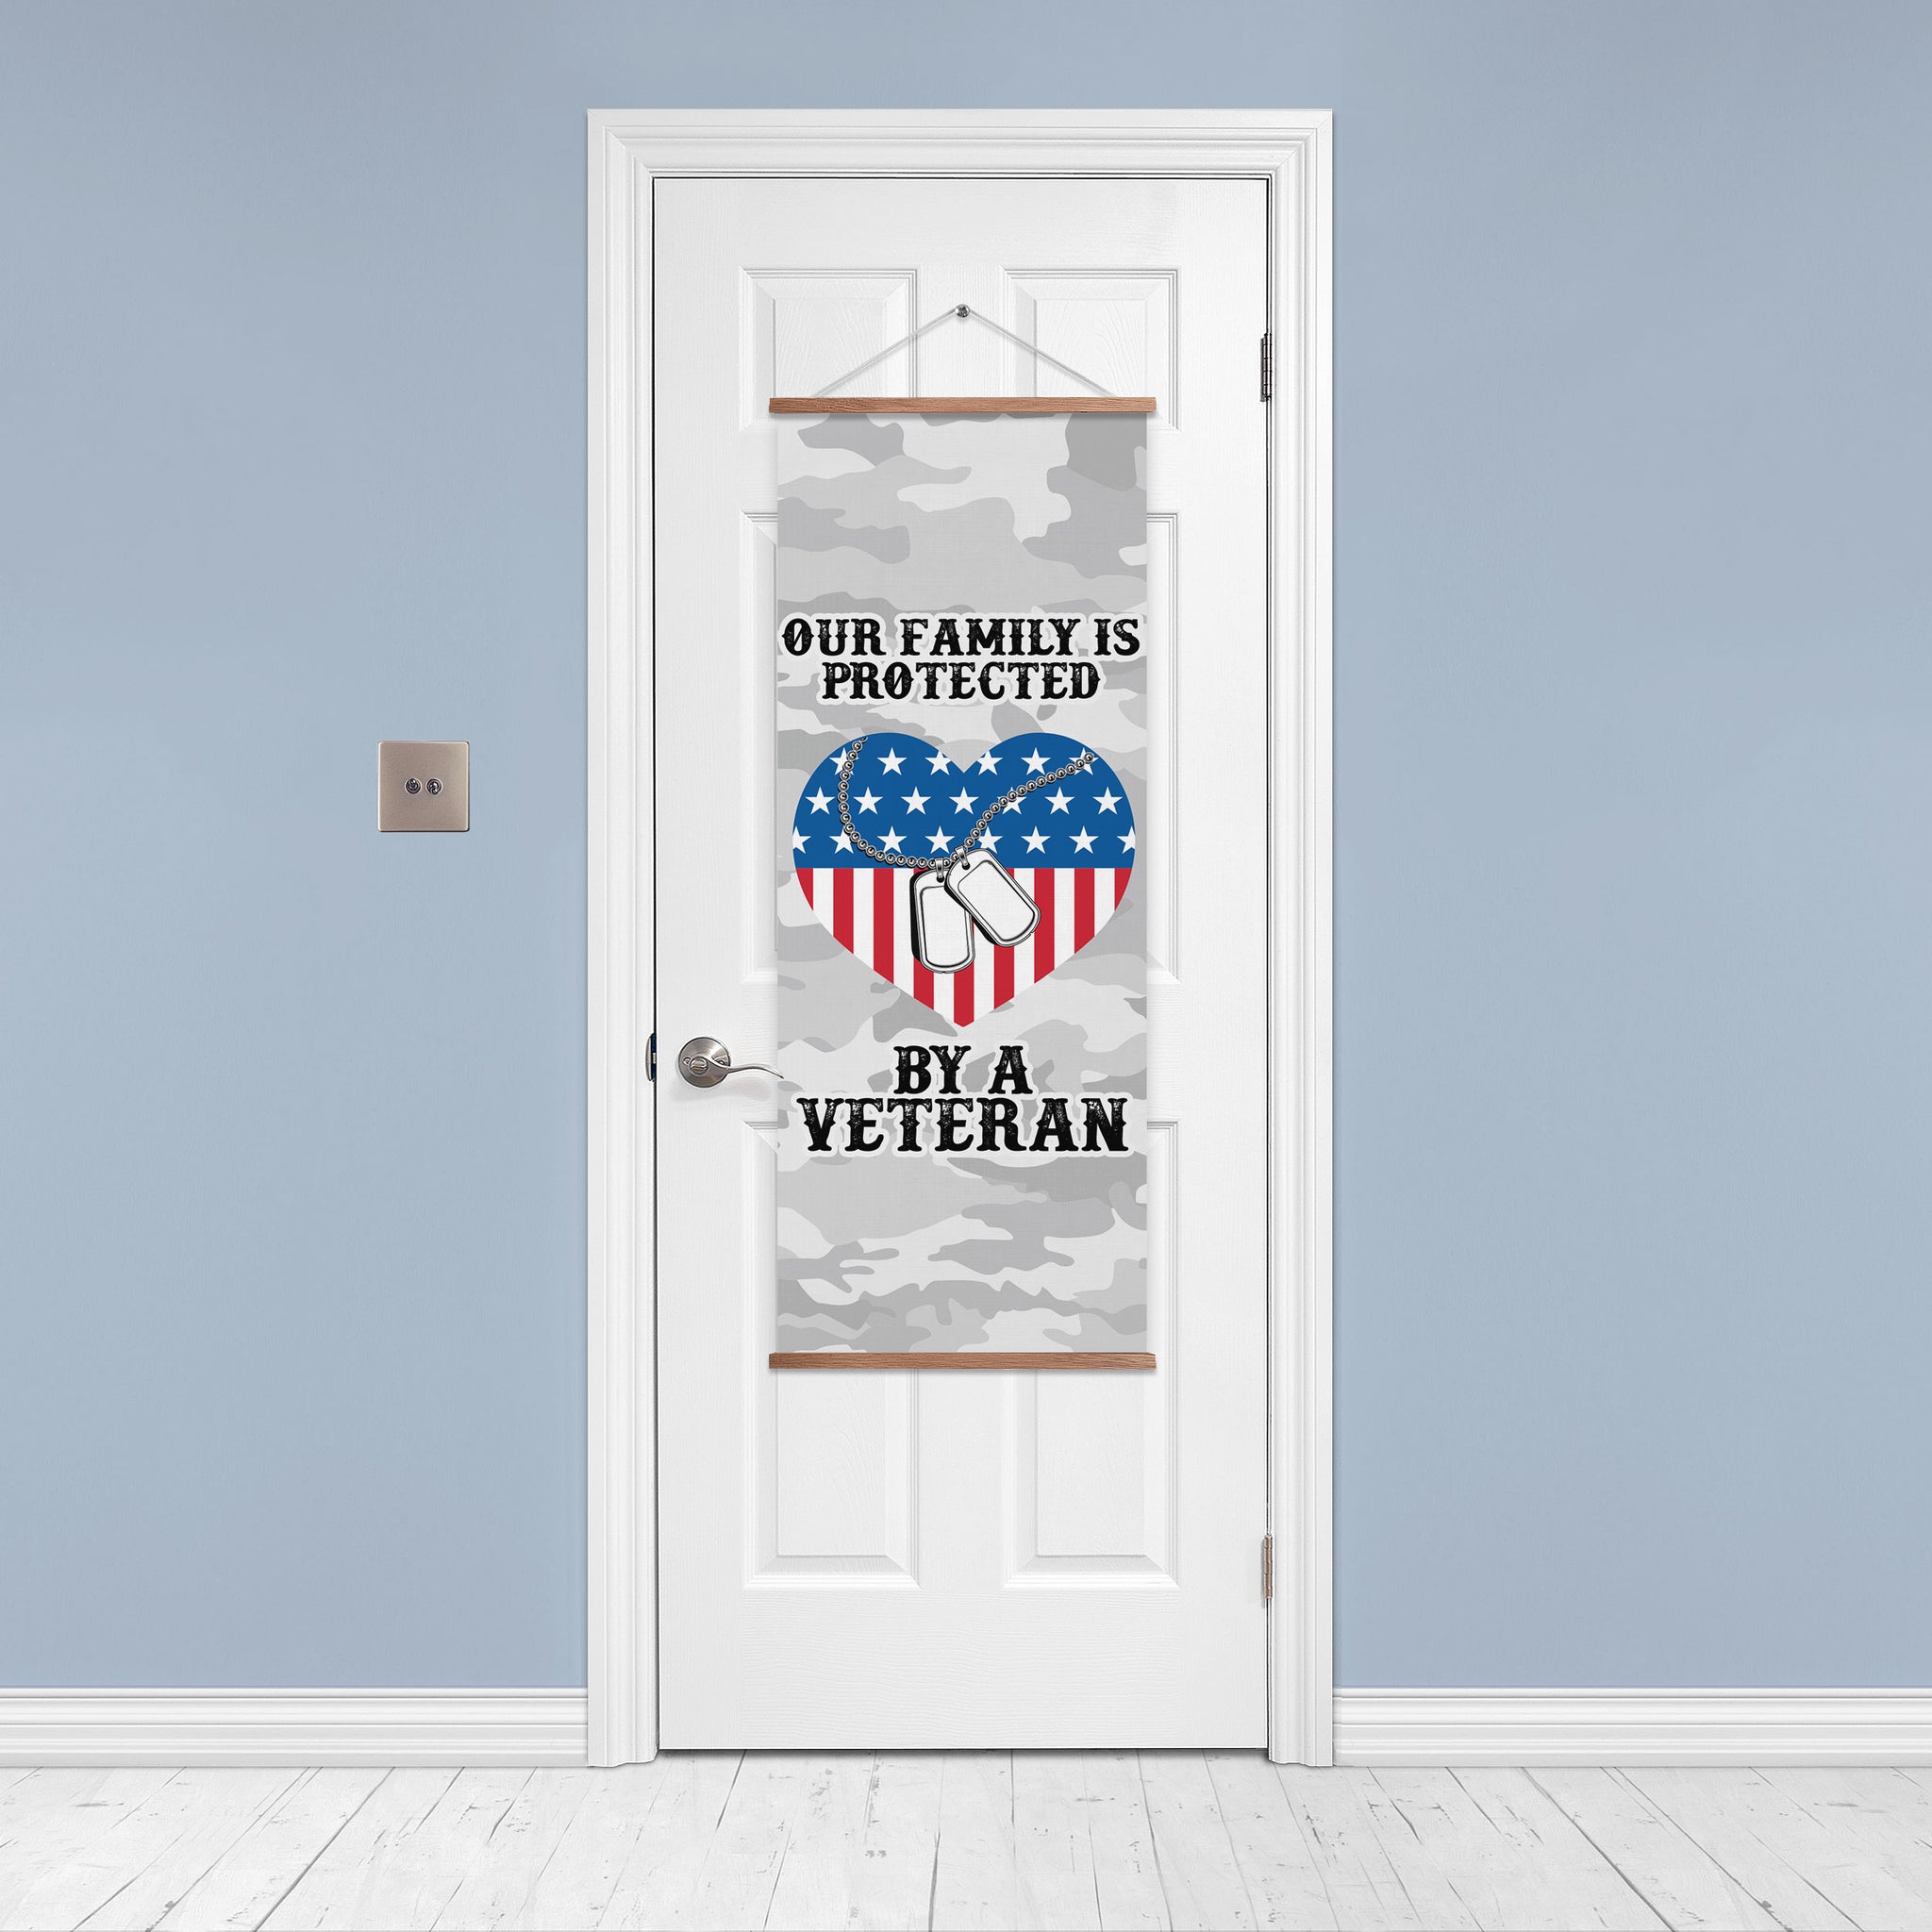 This House/Our Family is Protected by a Veteran-Dog Tag Door Banner